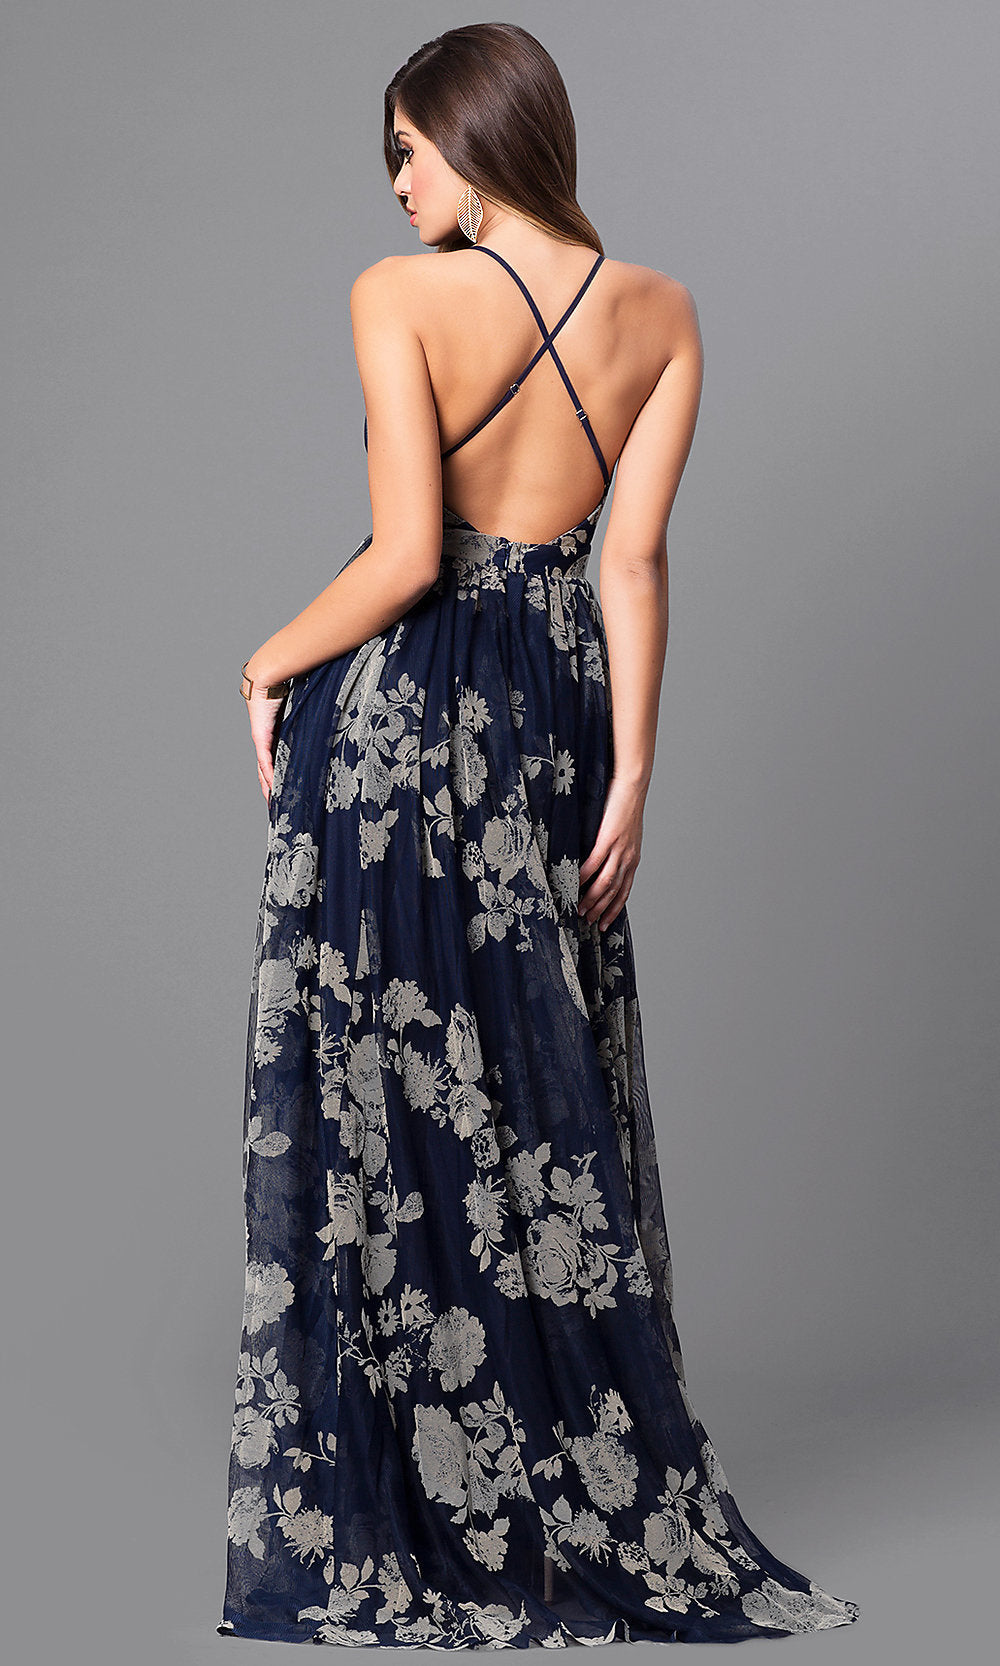 Luxxel Clothing-Floral-Print V-Neck Long Prom Dress with Empire Waist